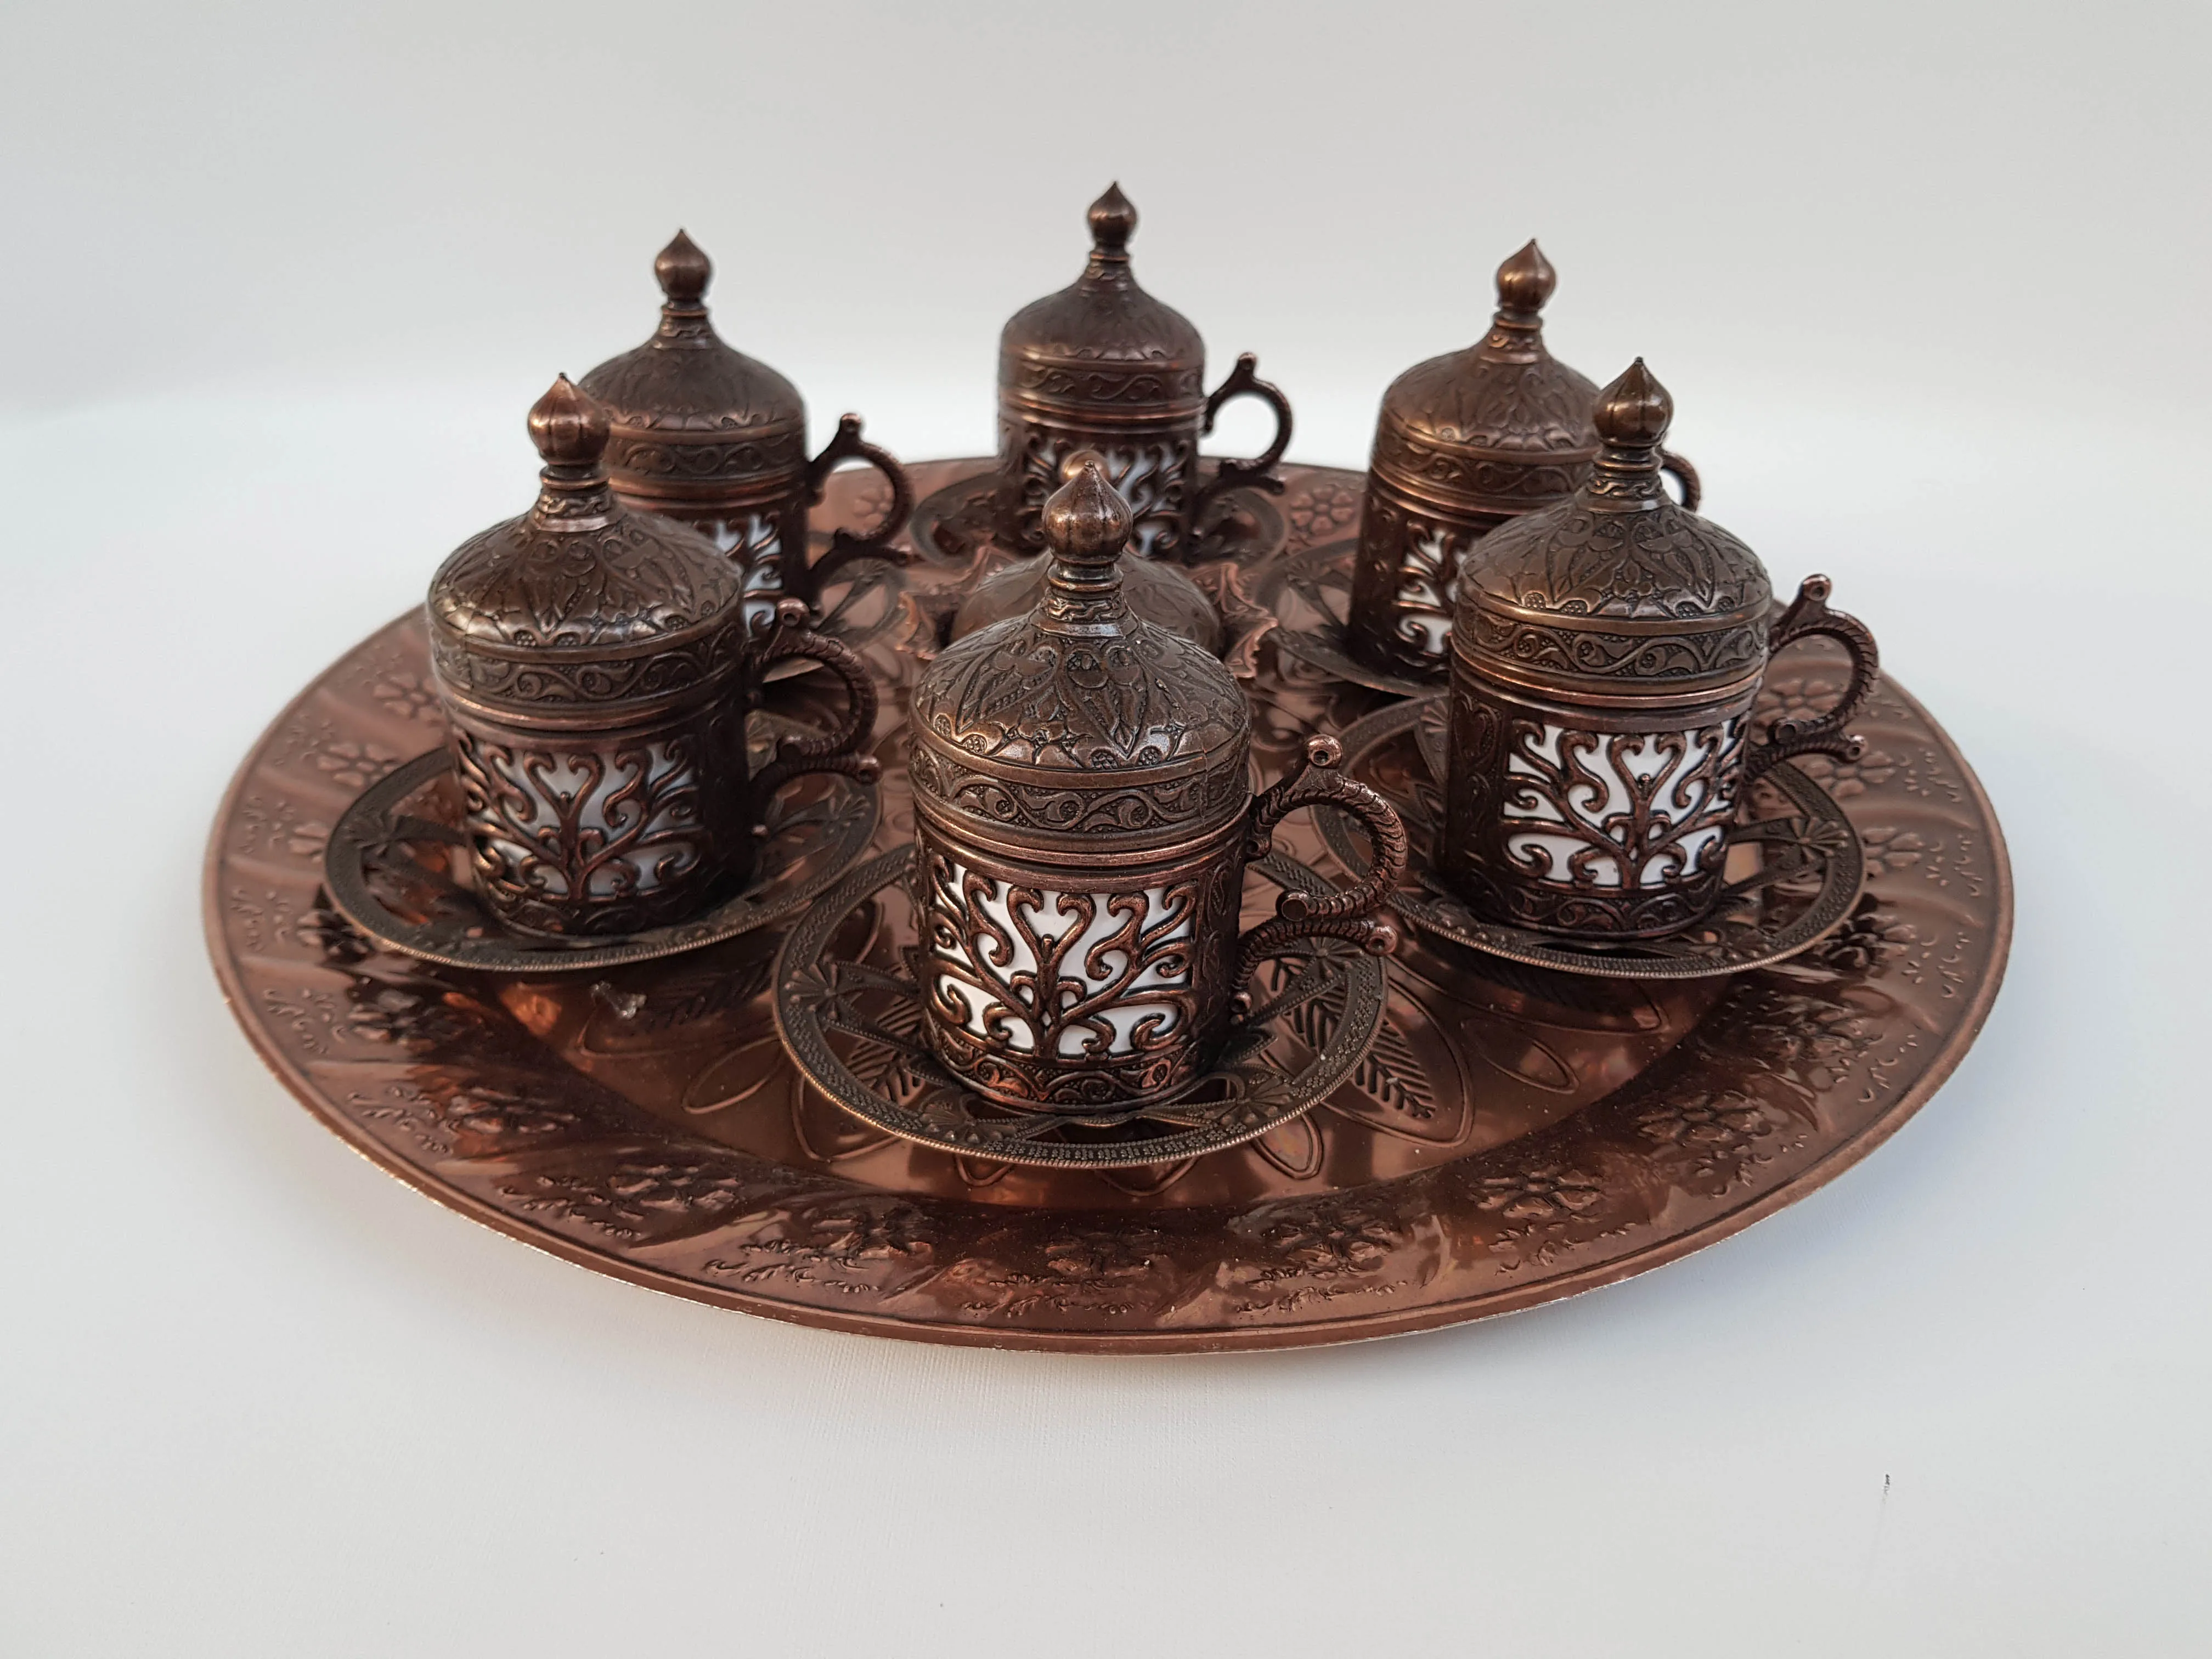  Turkish Coffee Set for 6 with Copper Coffee Pot and Mehmet  Efendi Turkish Coffee, Espresso Set of 6, Coffee Serving Set : Home &  Kitchen